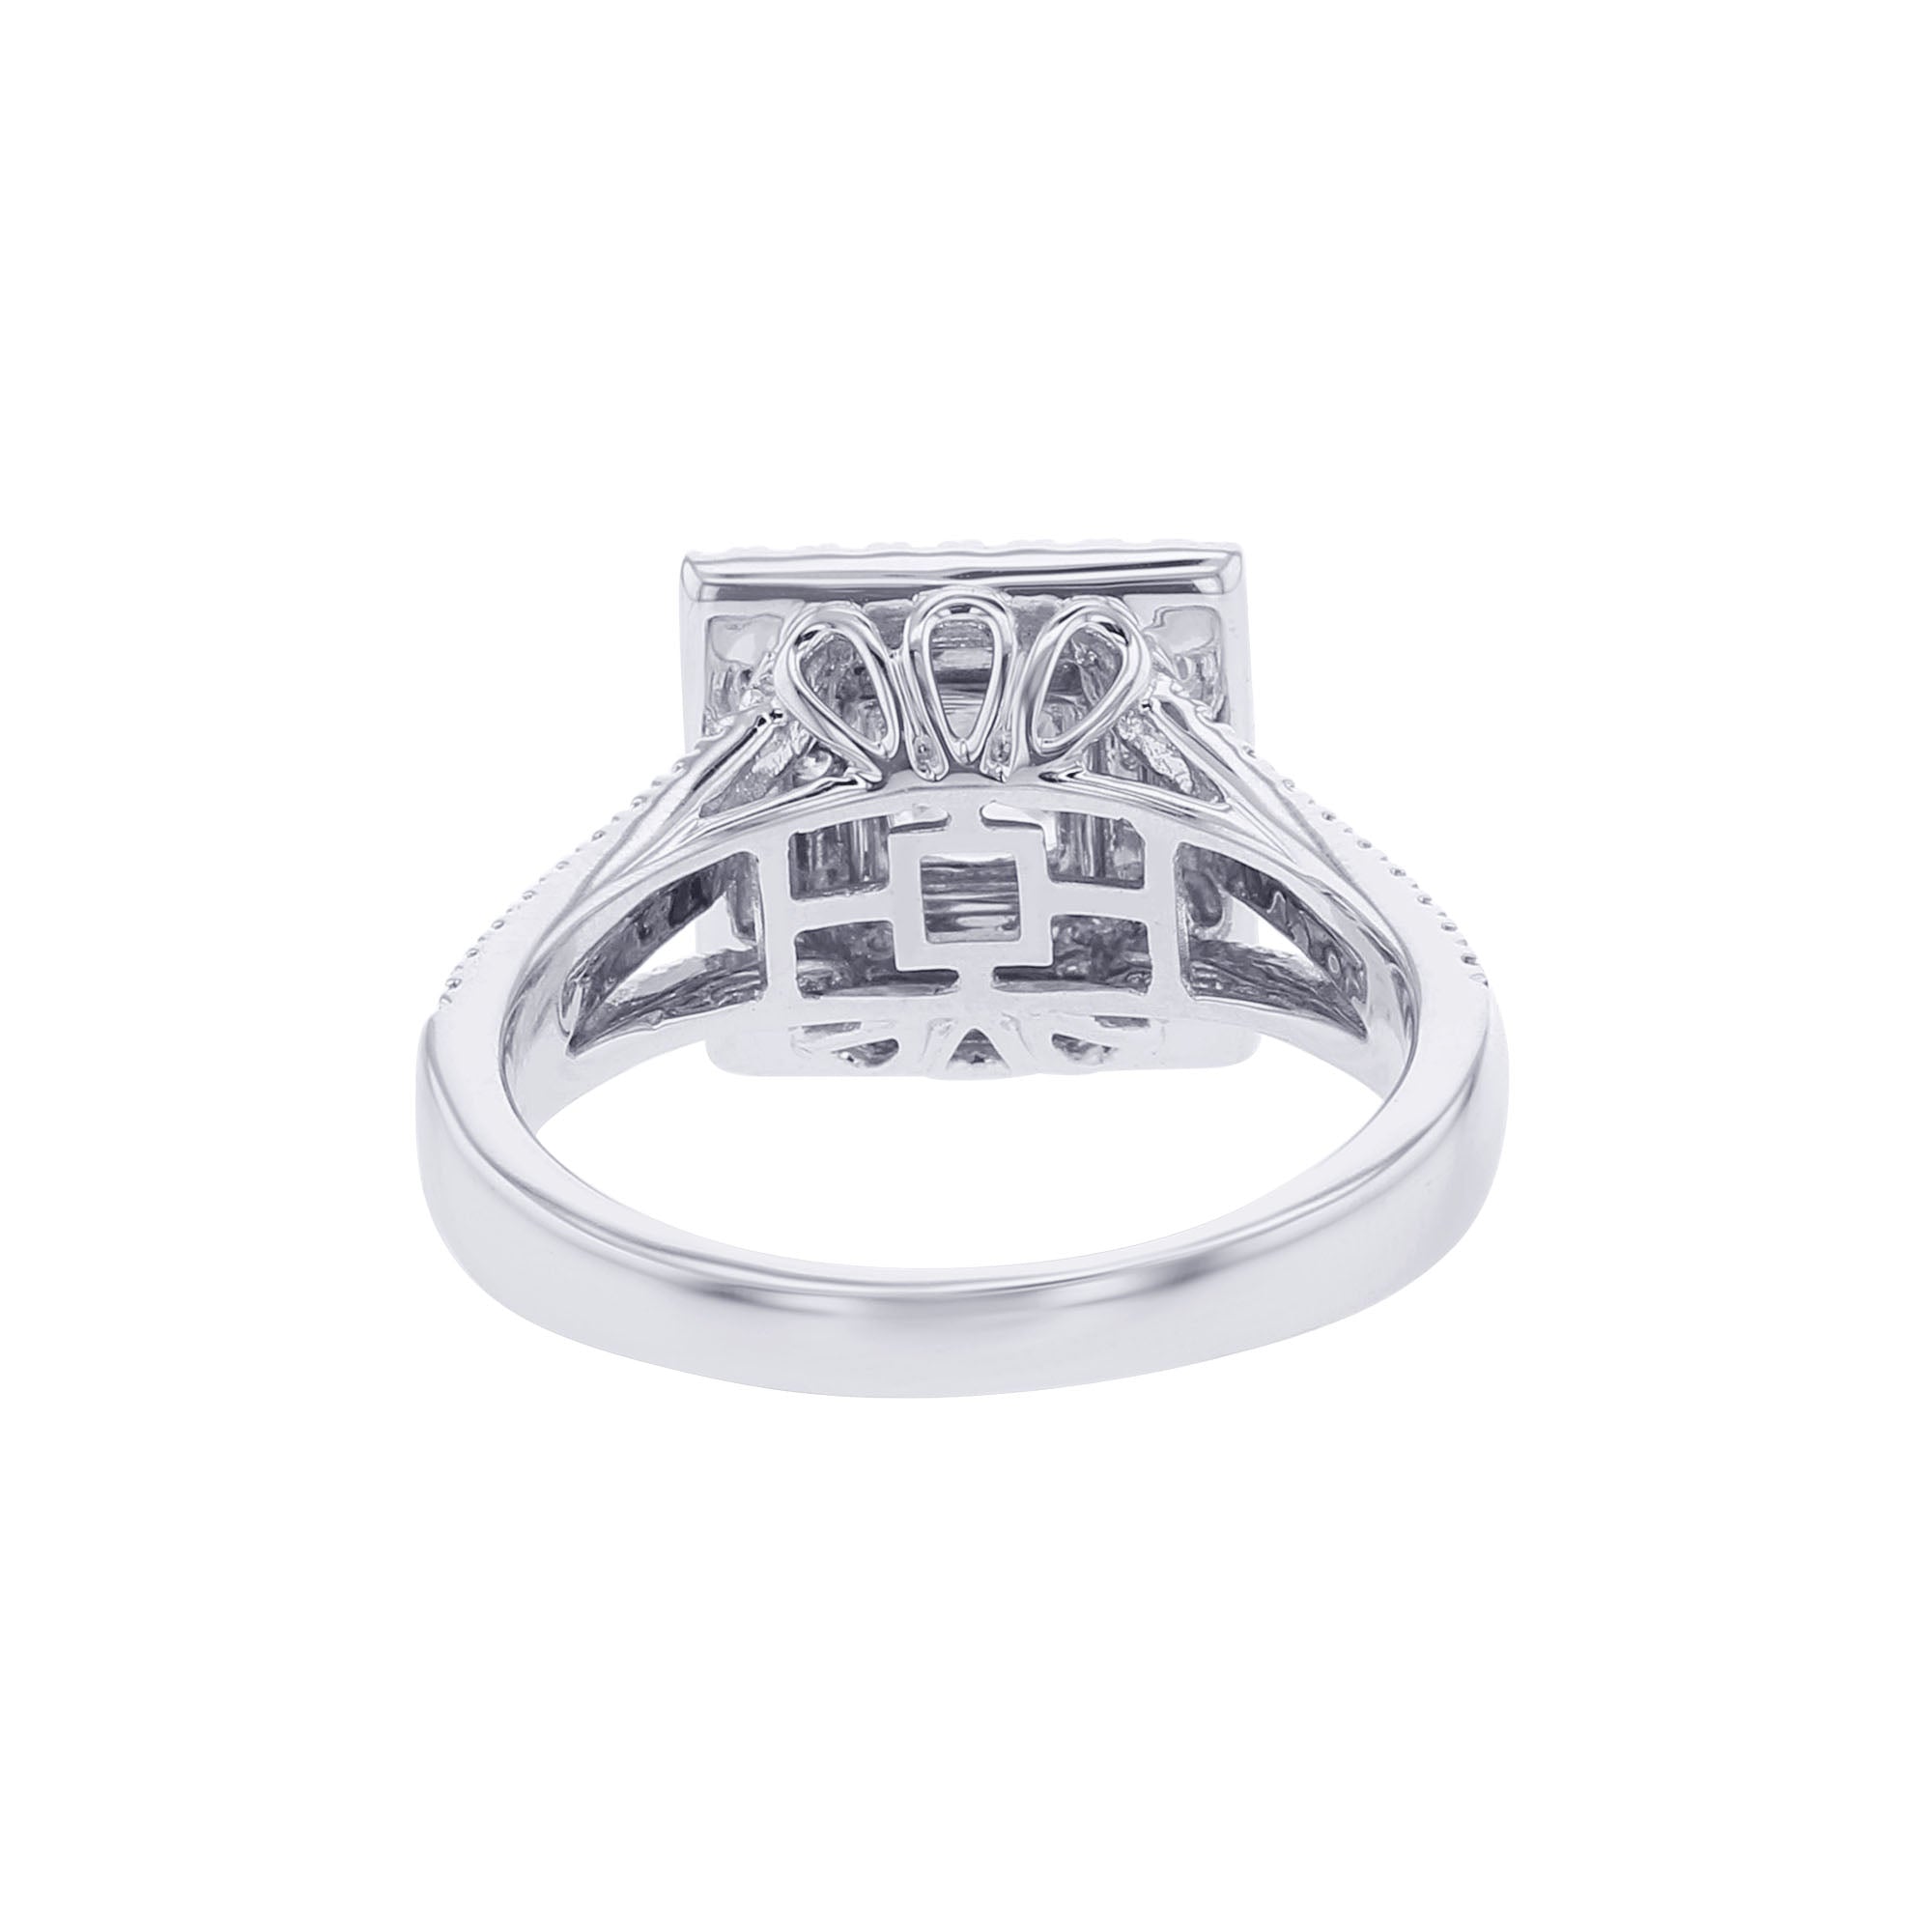 Millie Princess Double Halo Ready for Love Diamond Engagement Ring